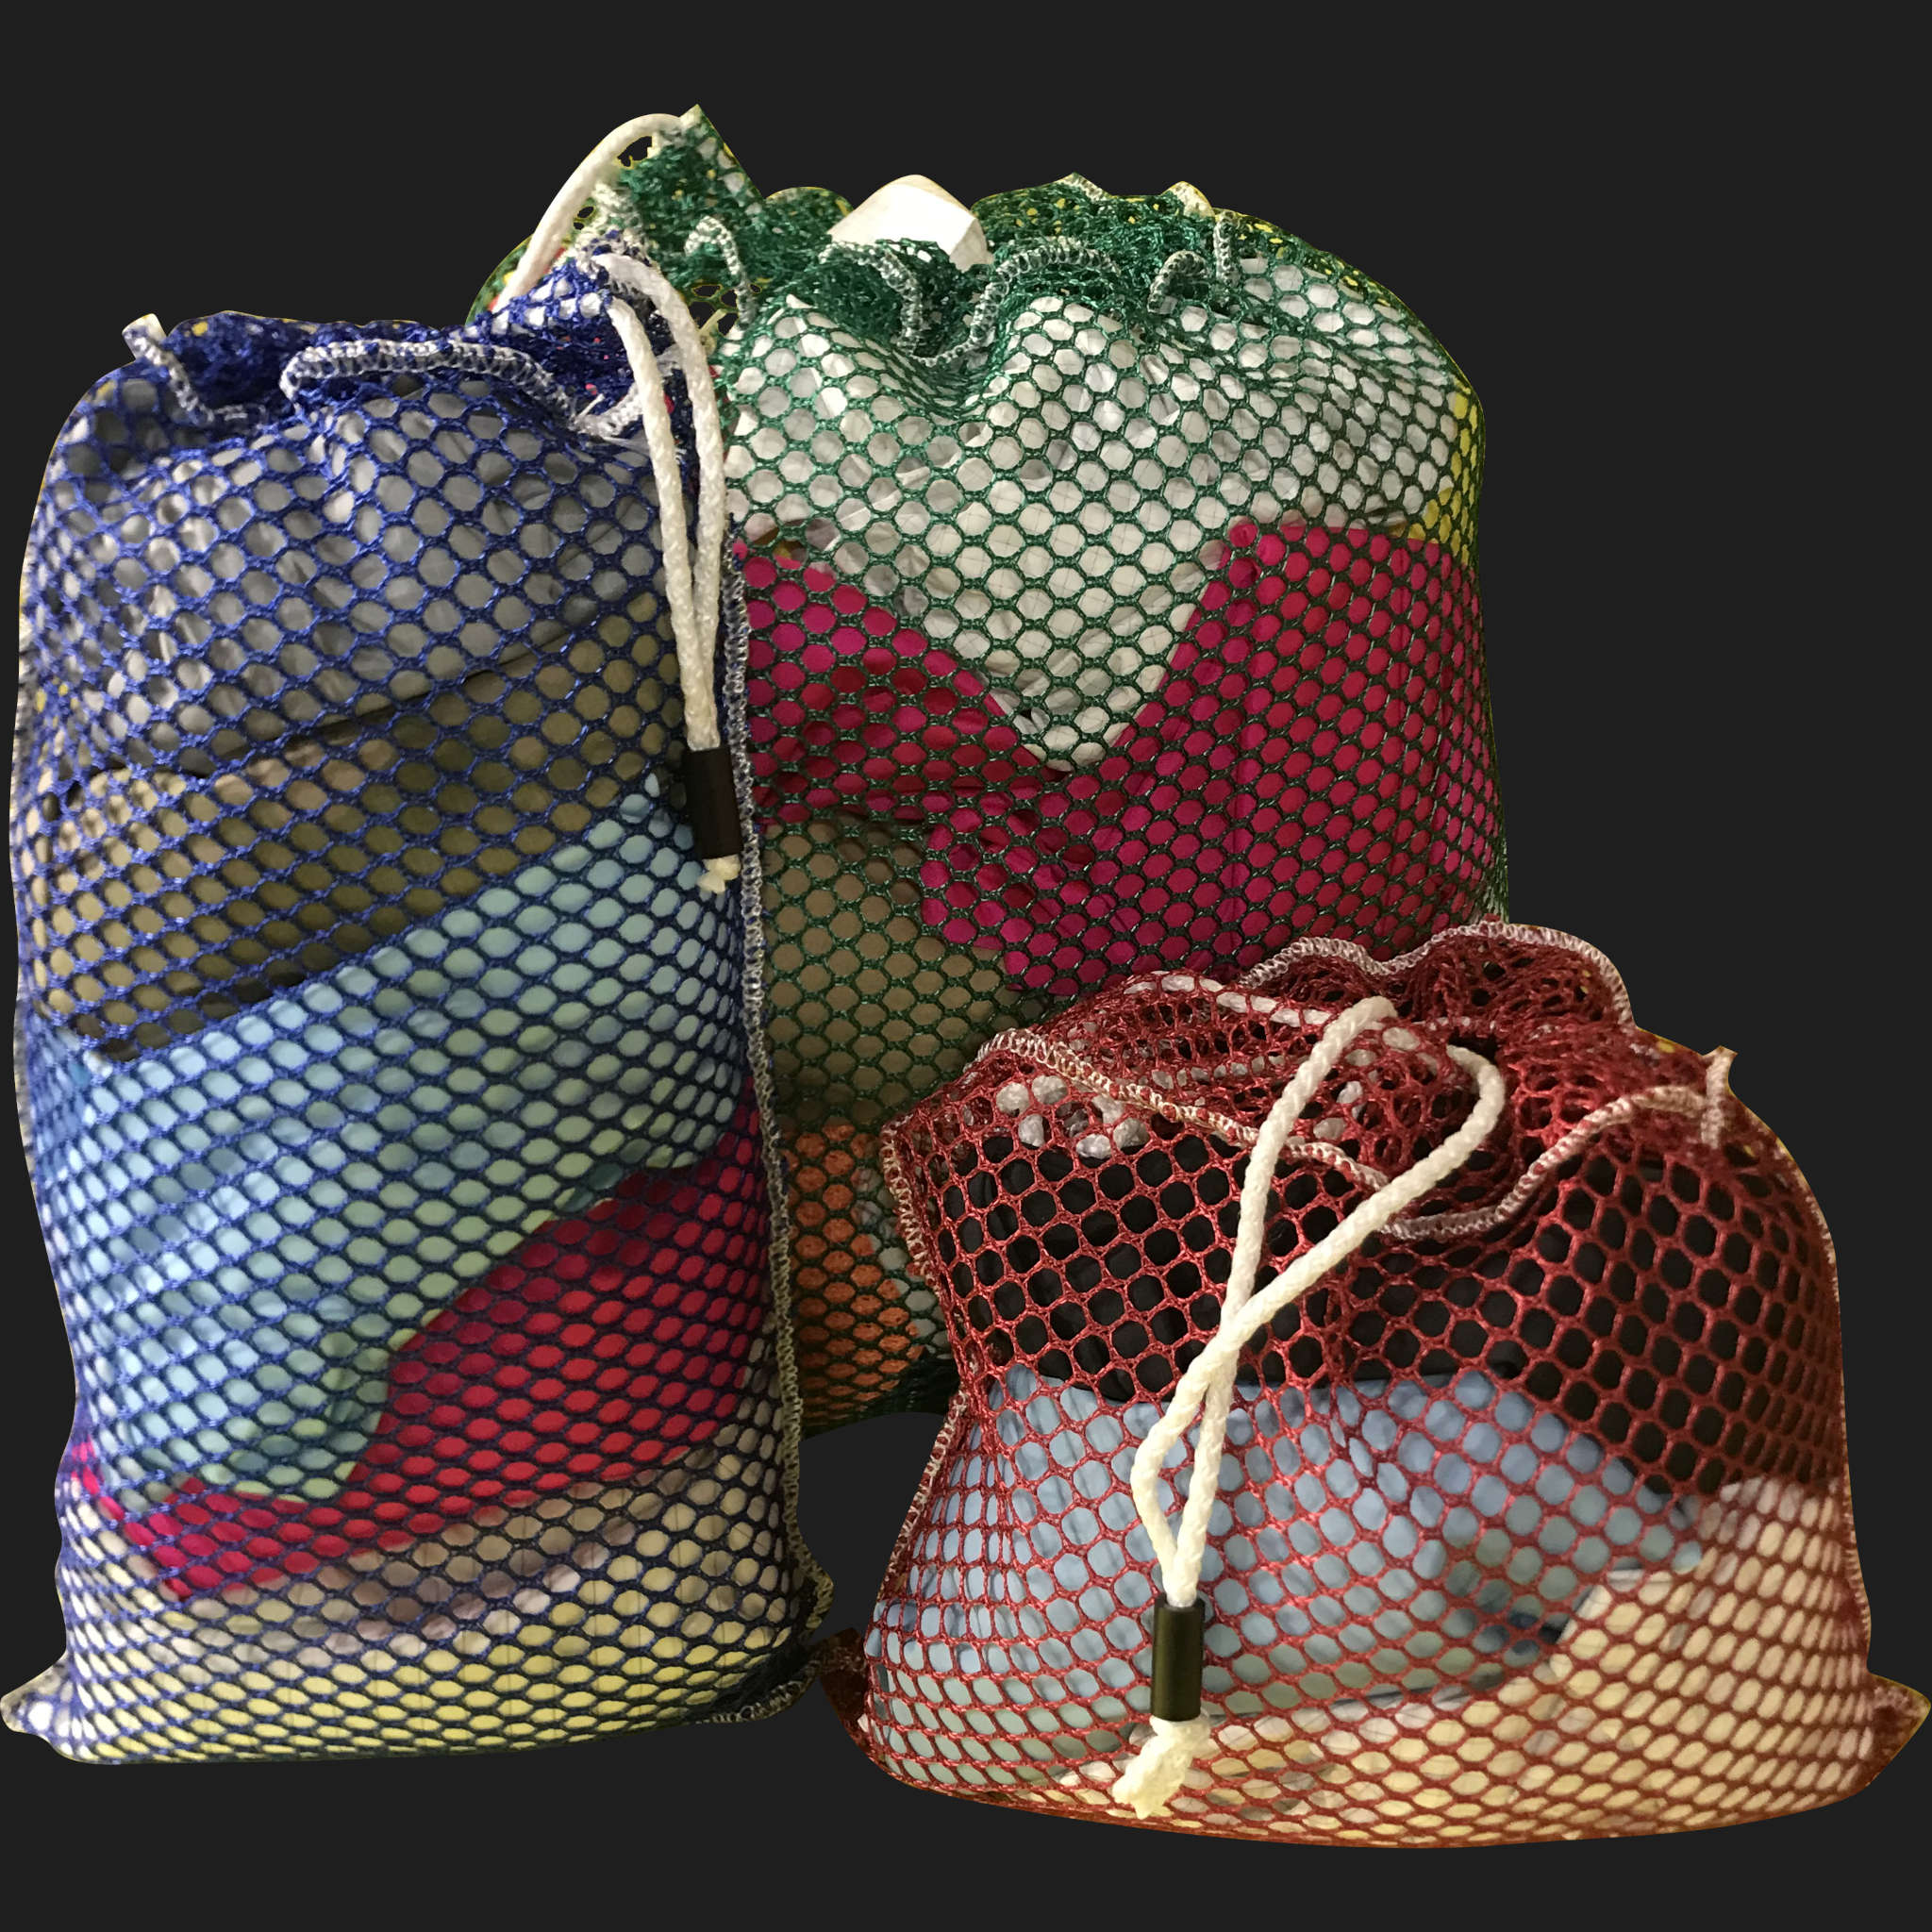 26" x 30" Customized Mesh-Net-Laundry Bags Heavy Duty with Cord and barrellock closure